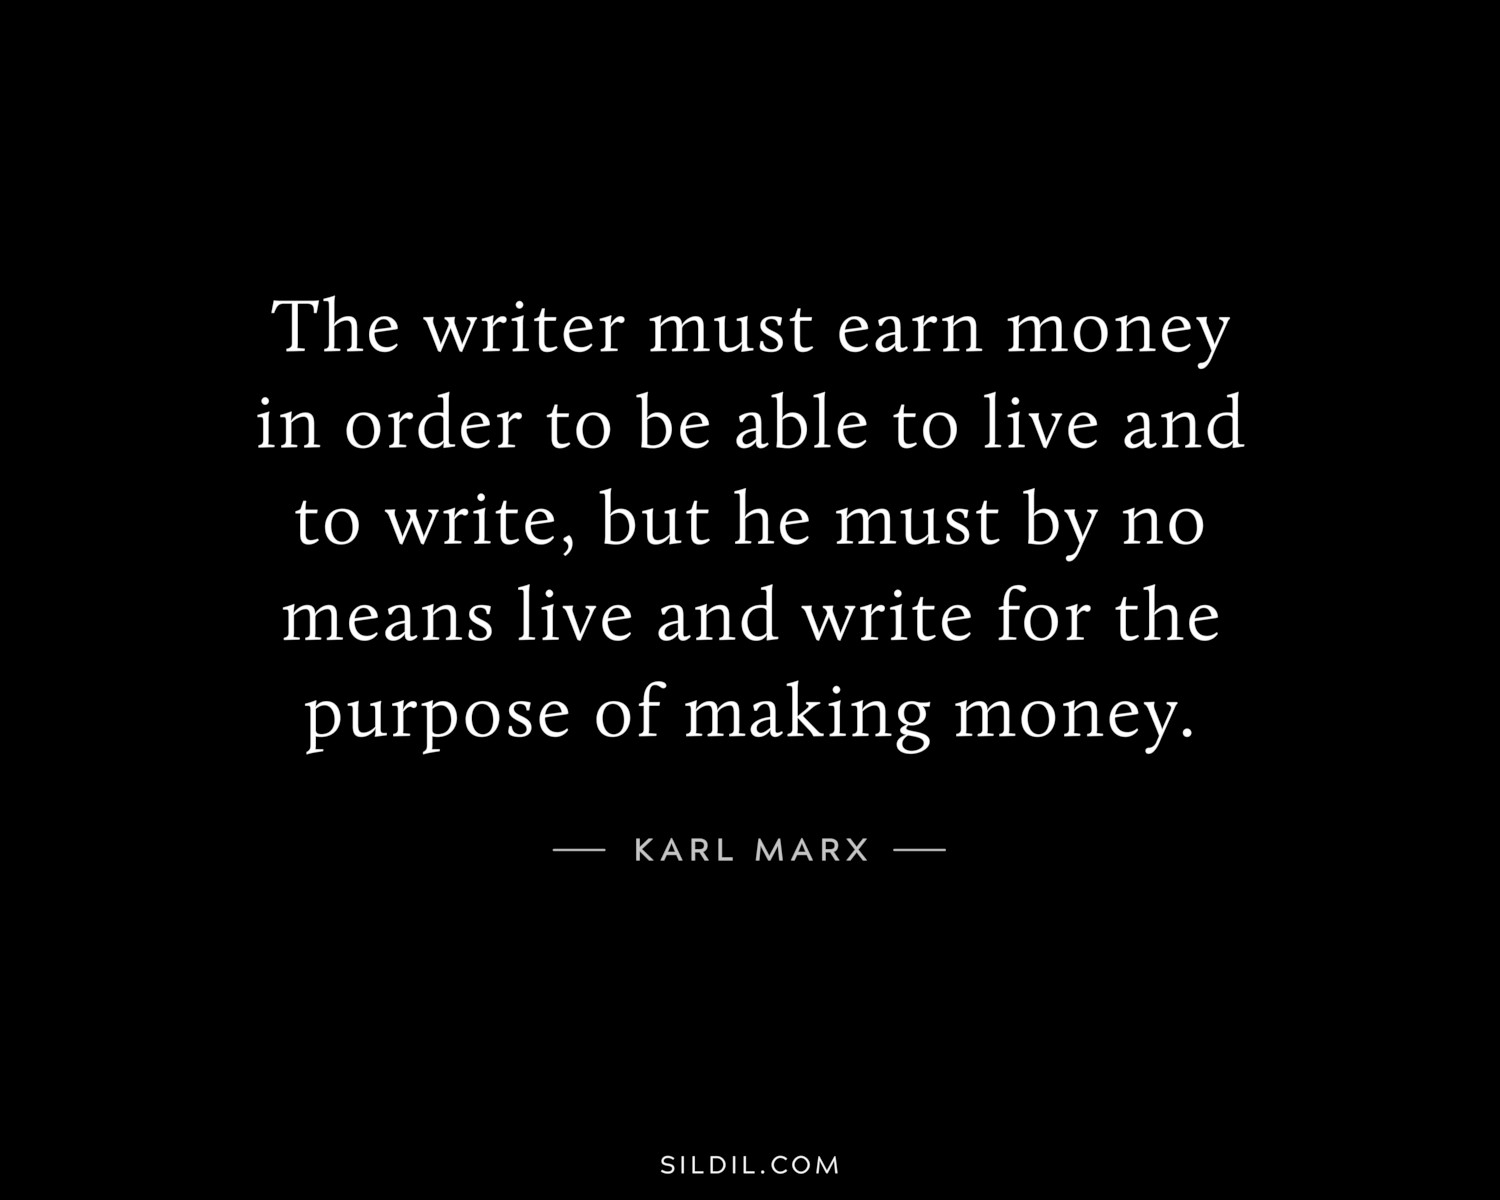 The writer must earn money in order to be able to live and to write, but he must by no means live and write for the purpose of making money.